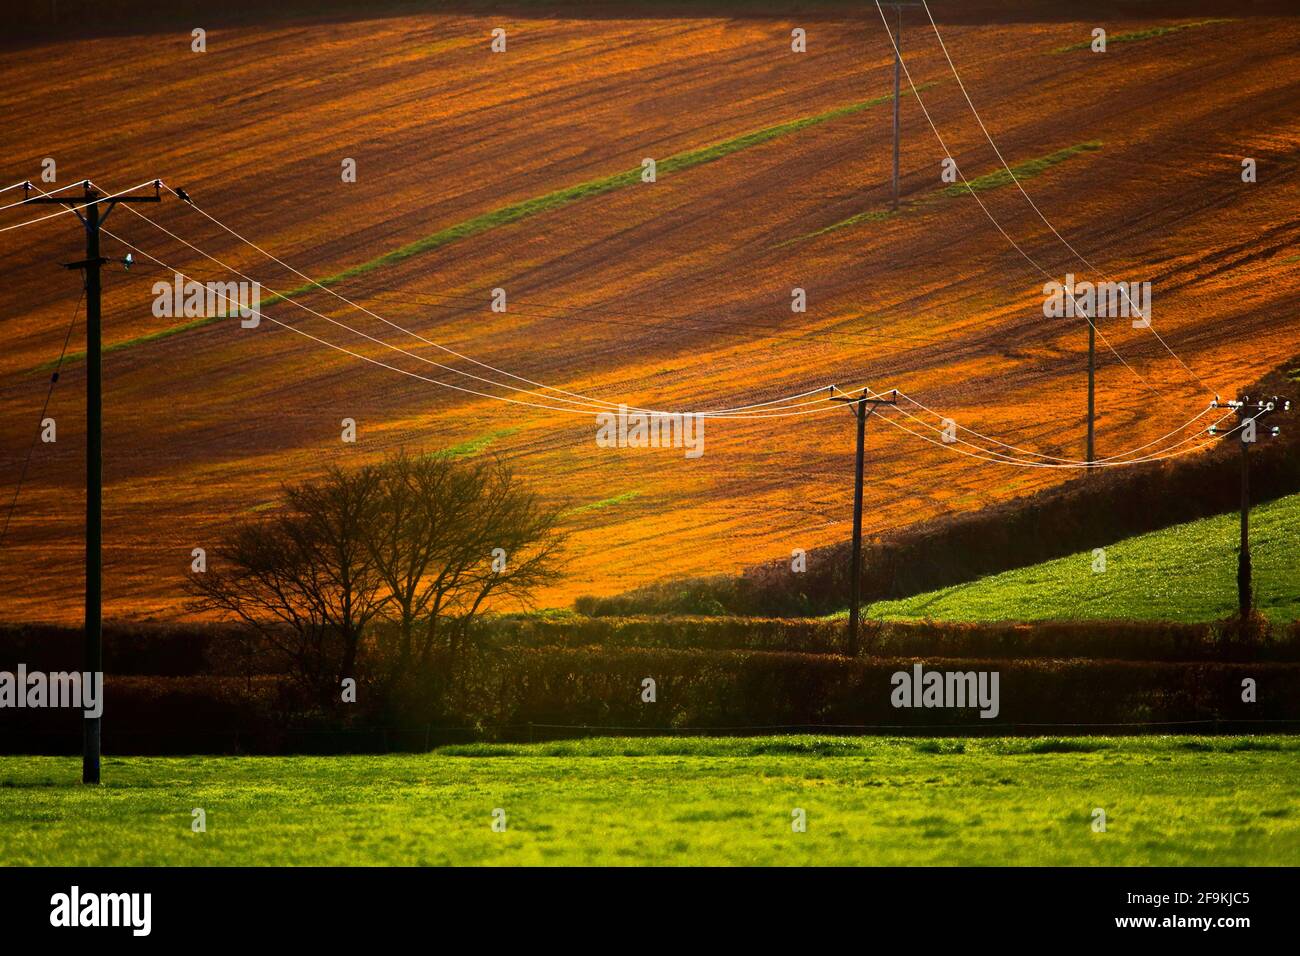 Electrical wire lines in agricultural field Stock Photo